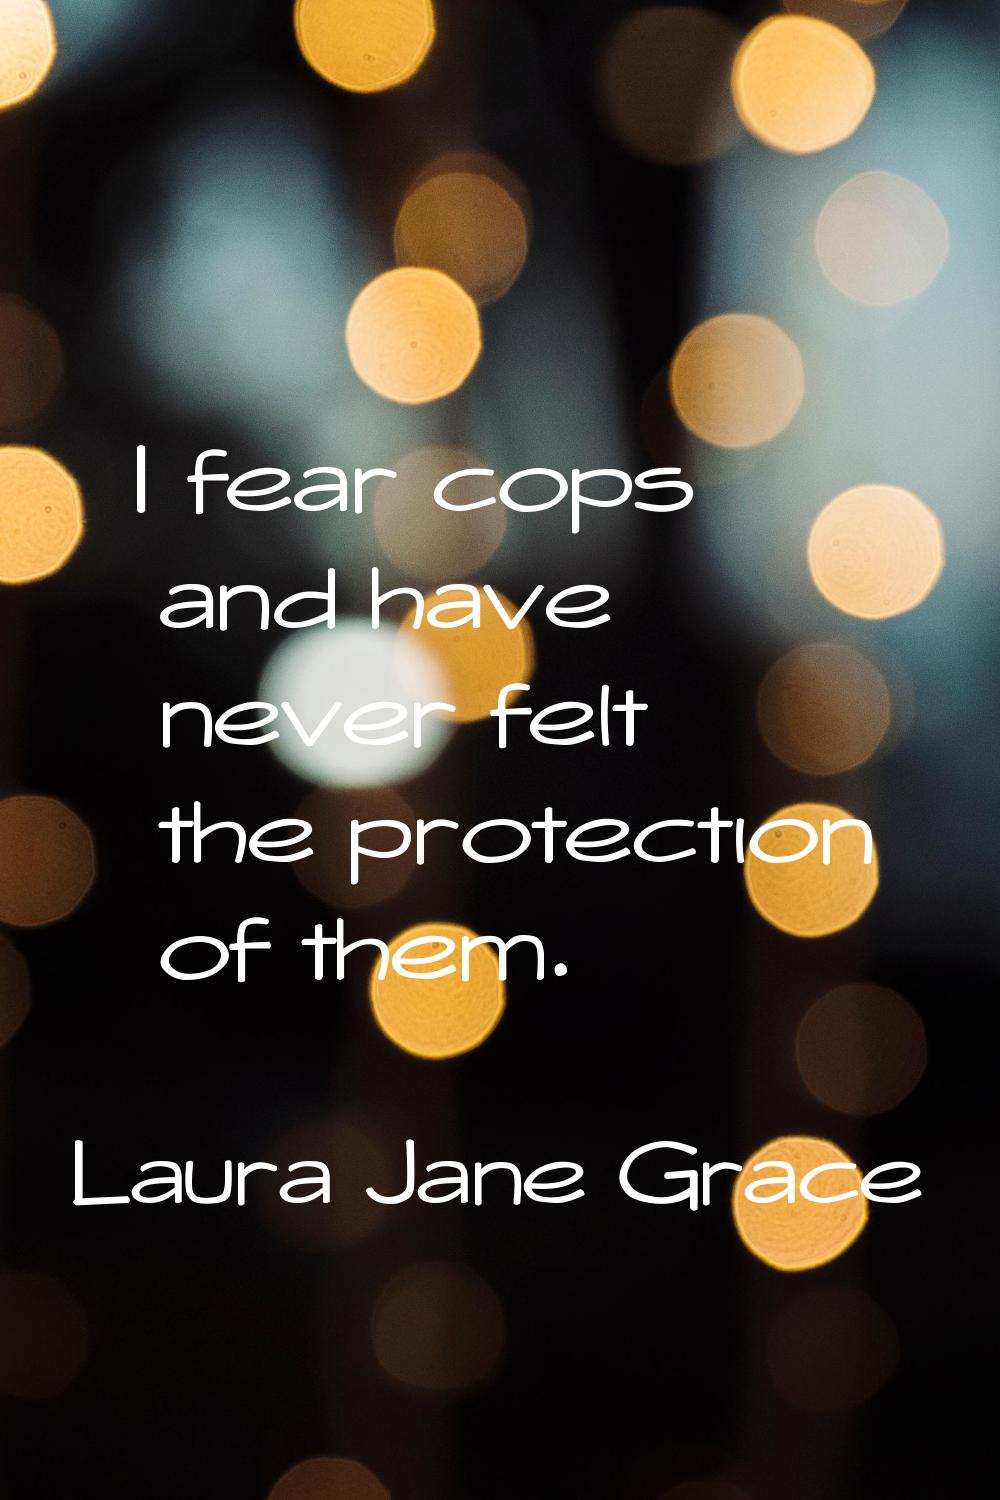 I fear cops and have never felt the protection of them.